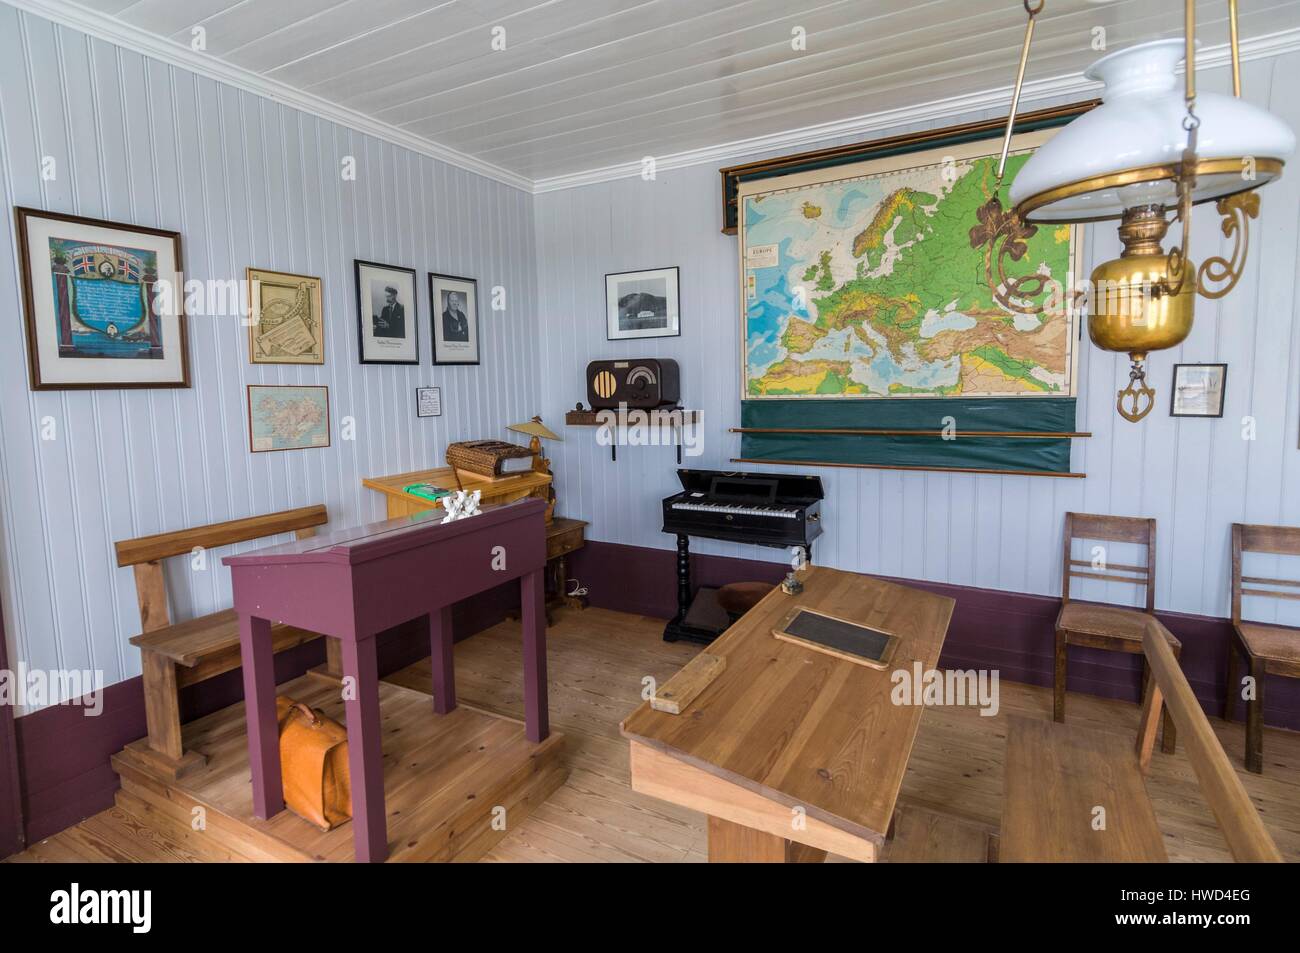 Iceland, North Atlantic, South, classroom of a traditional school made of painted driftwood, museum of Skógar, town of of the municipality of Rangárþing eystra located in Suðurland area, collection of Pordur Tomasson Stock Photo